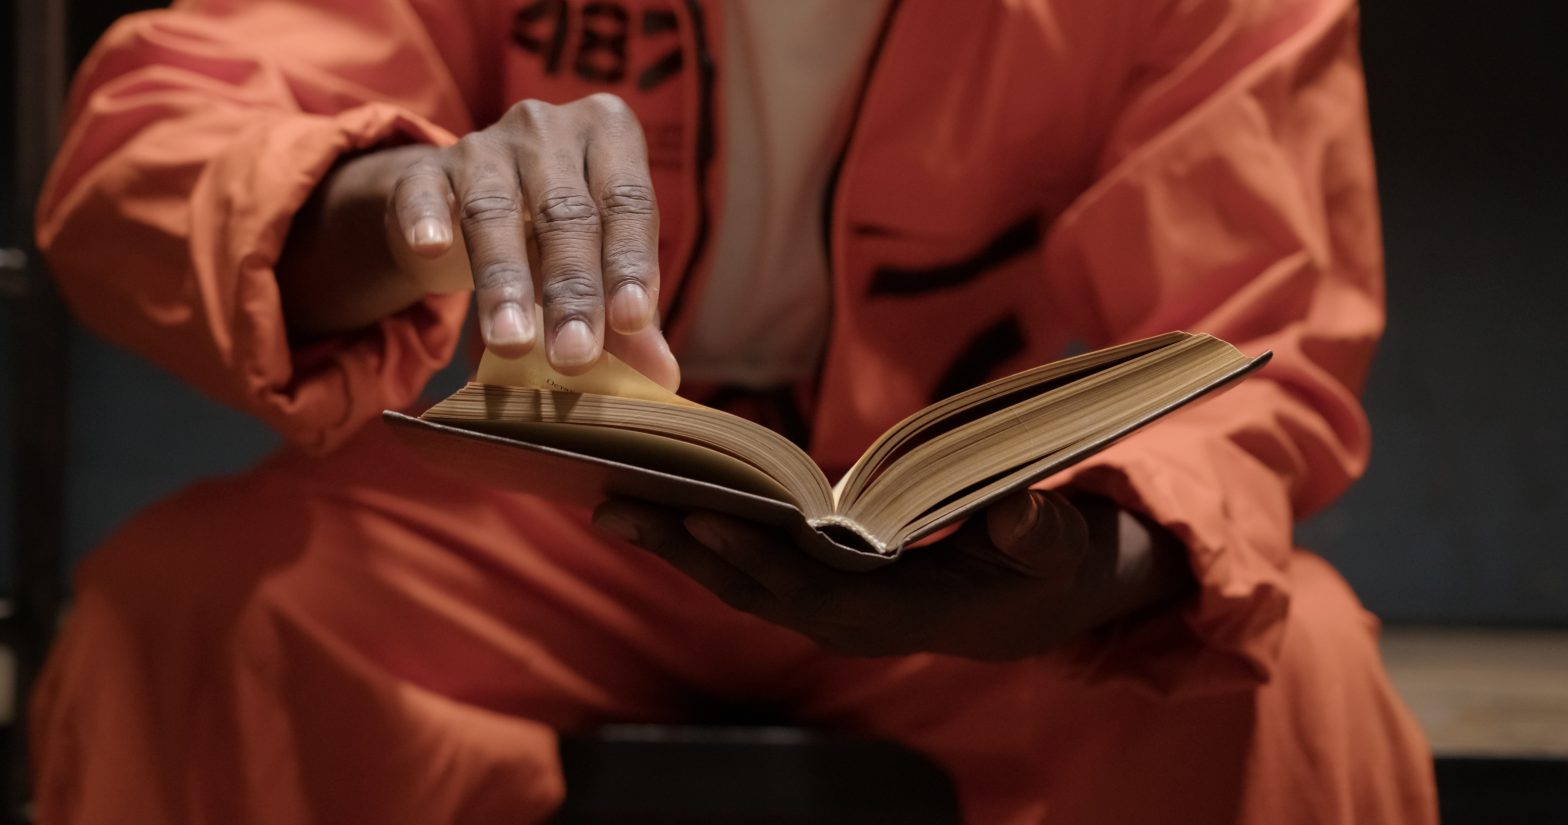 A prisoner reading a book. prison education - Chippewa County Correctional Facilities